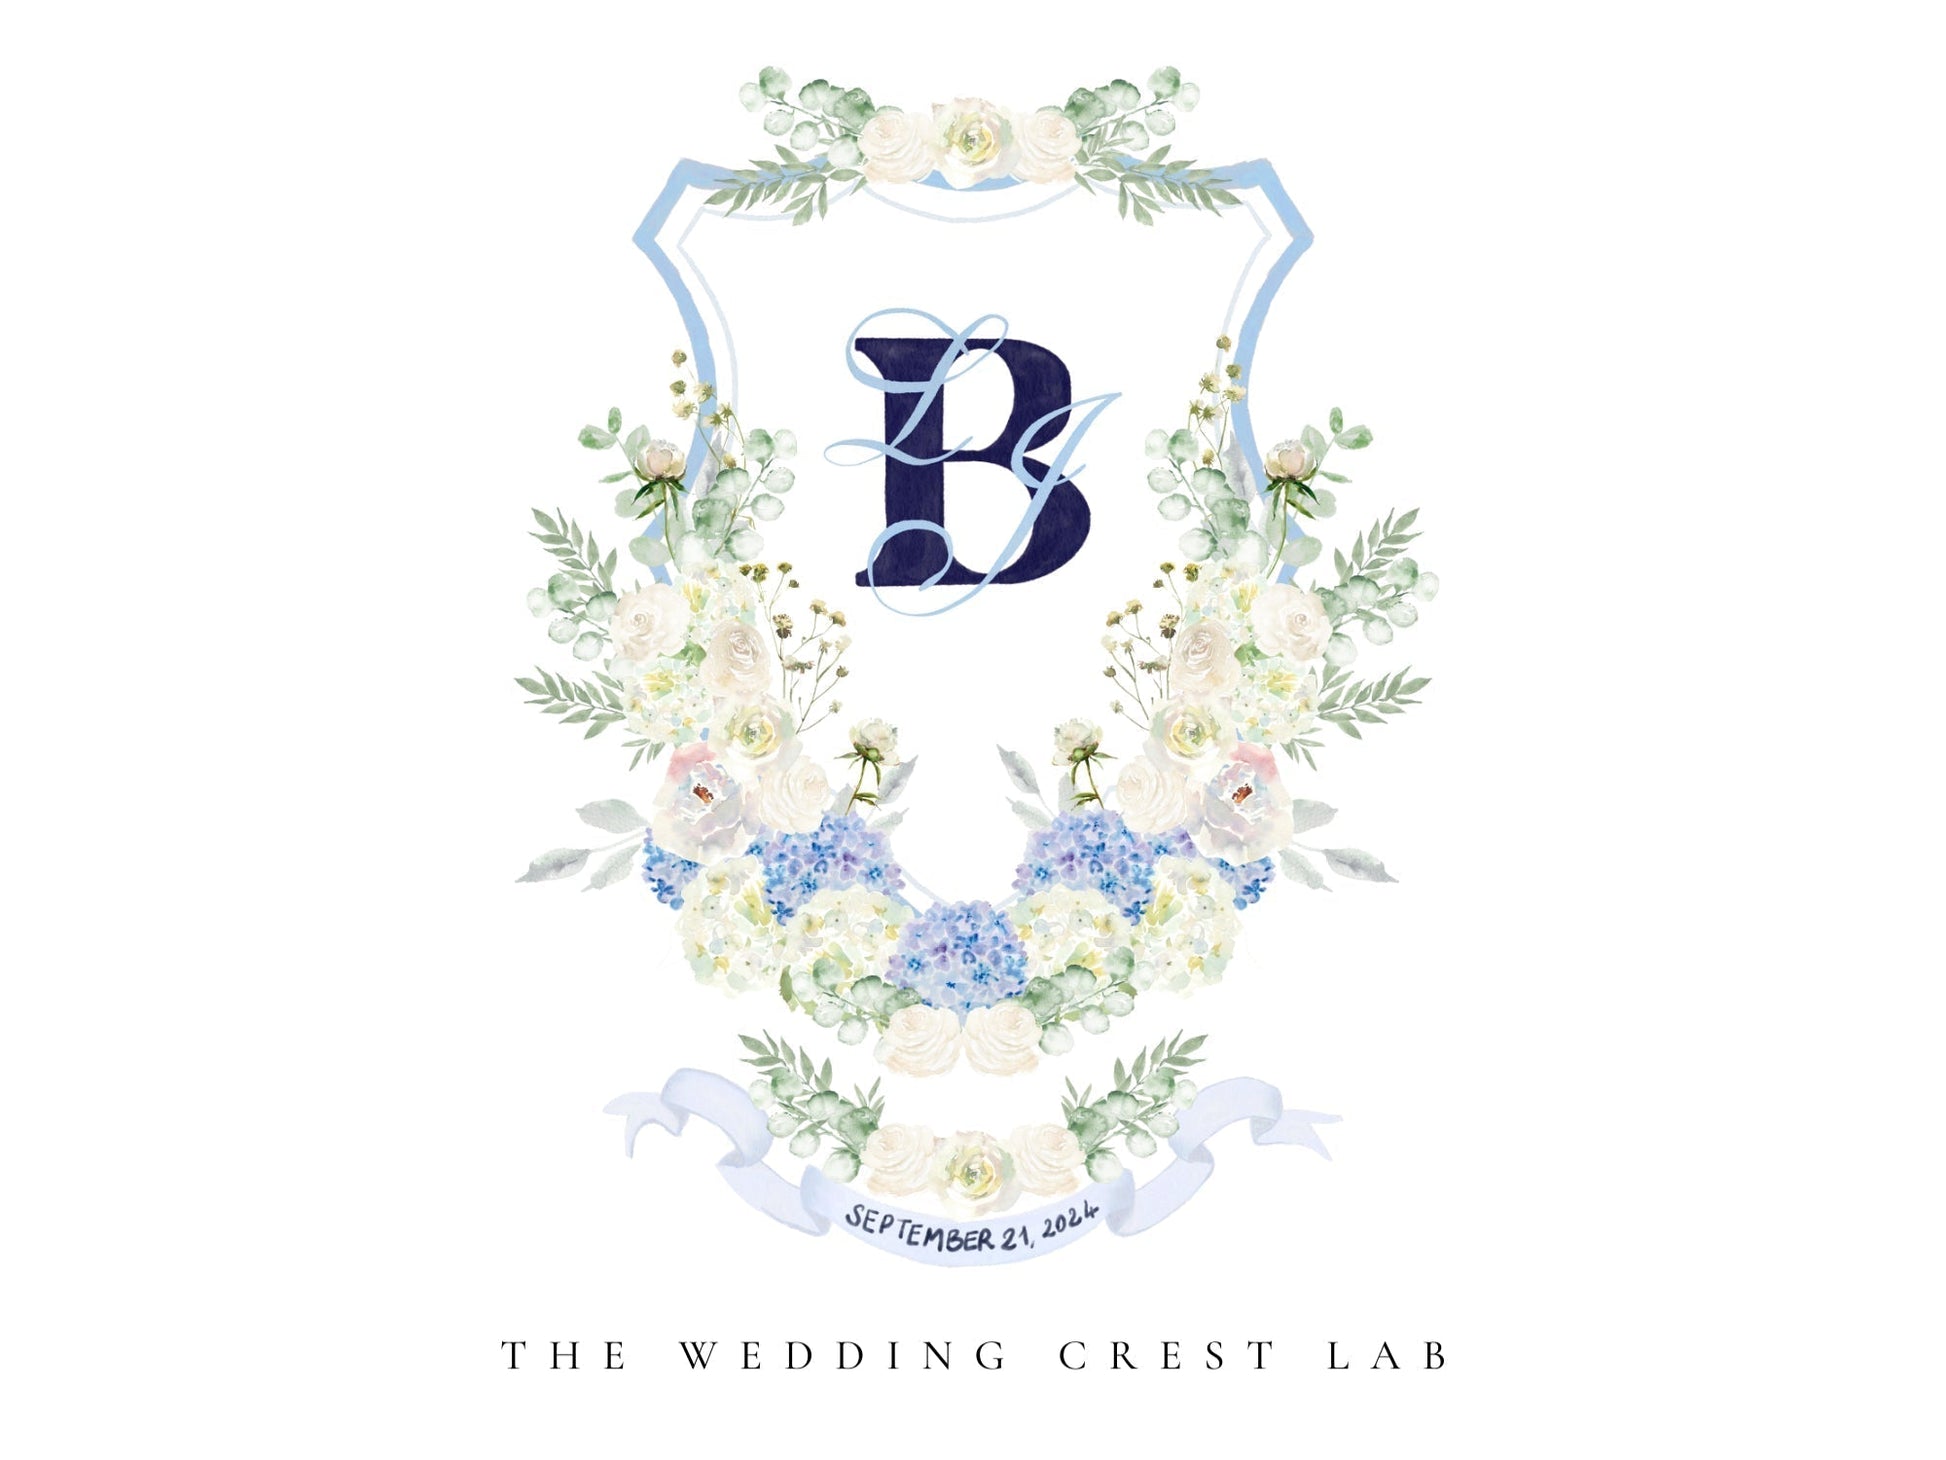 Custom wedding crest with watercolor flowers and pet or venue portrait The Wedding Crest Lab